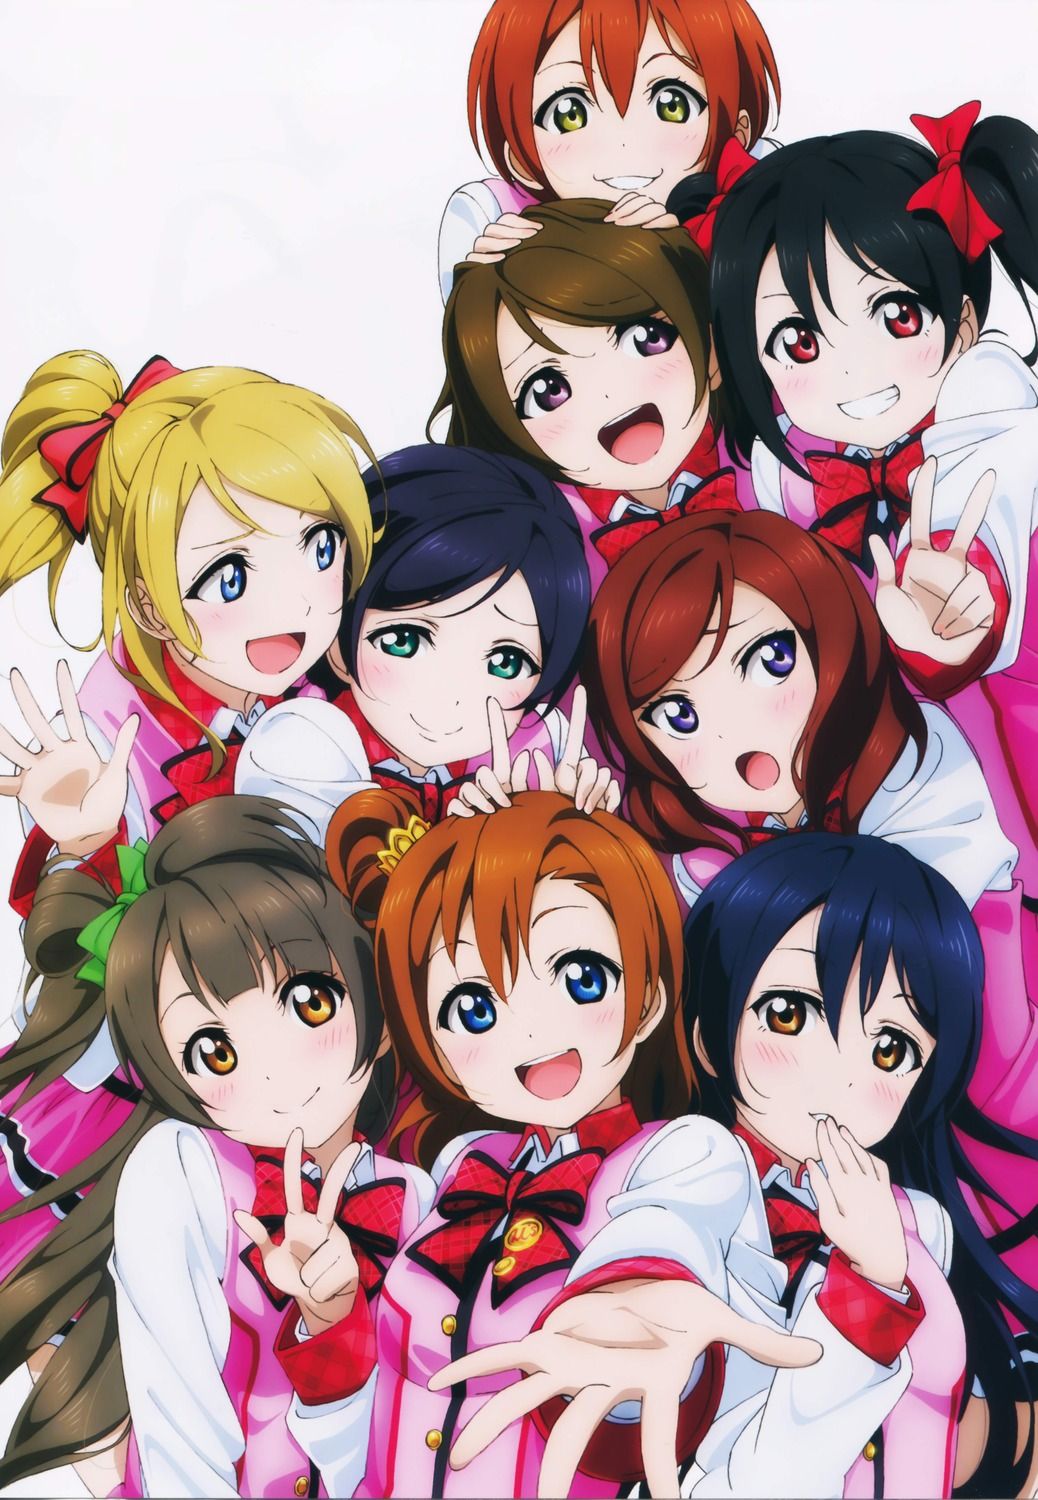 Love live! Wallpaper 05 [15 pictures] 2